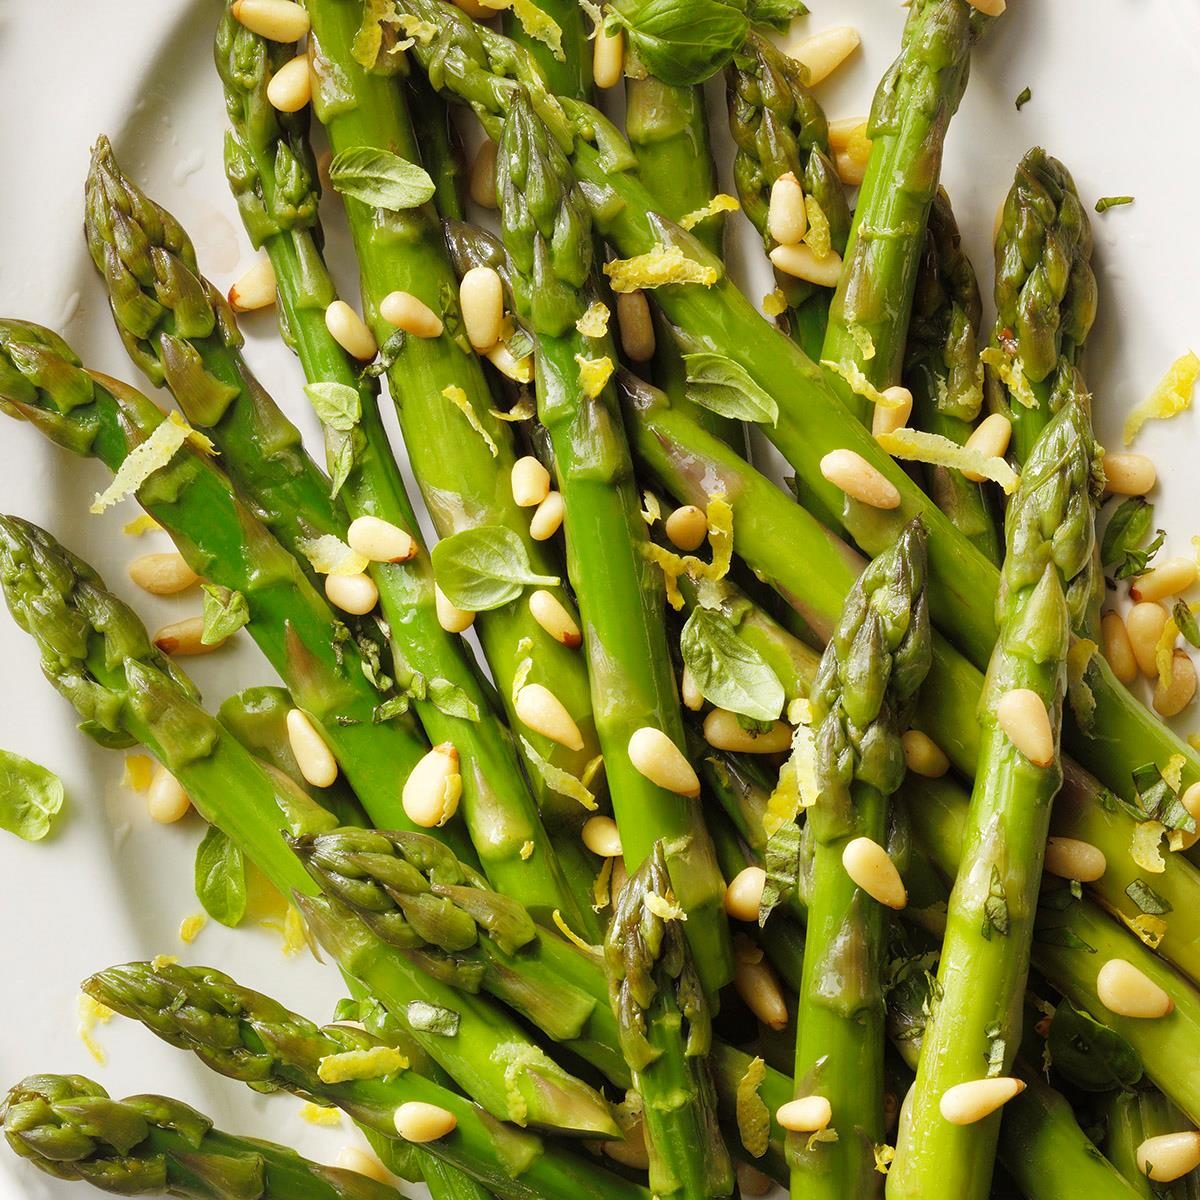 Oven-Roasted Asparagus Recipe: How to Make It